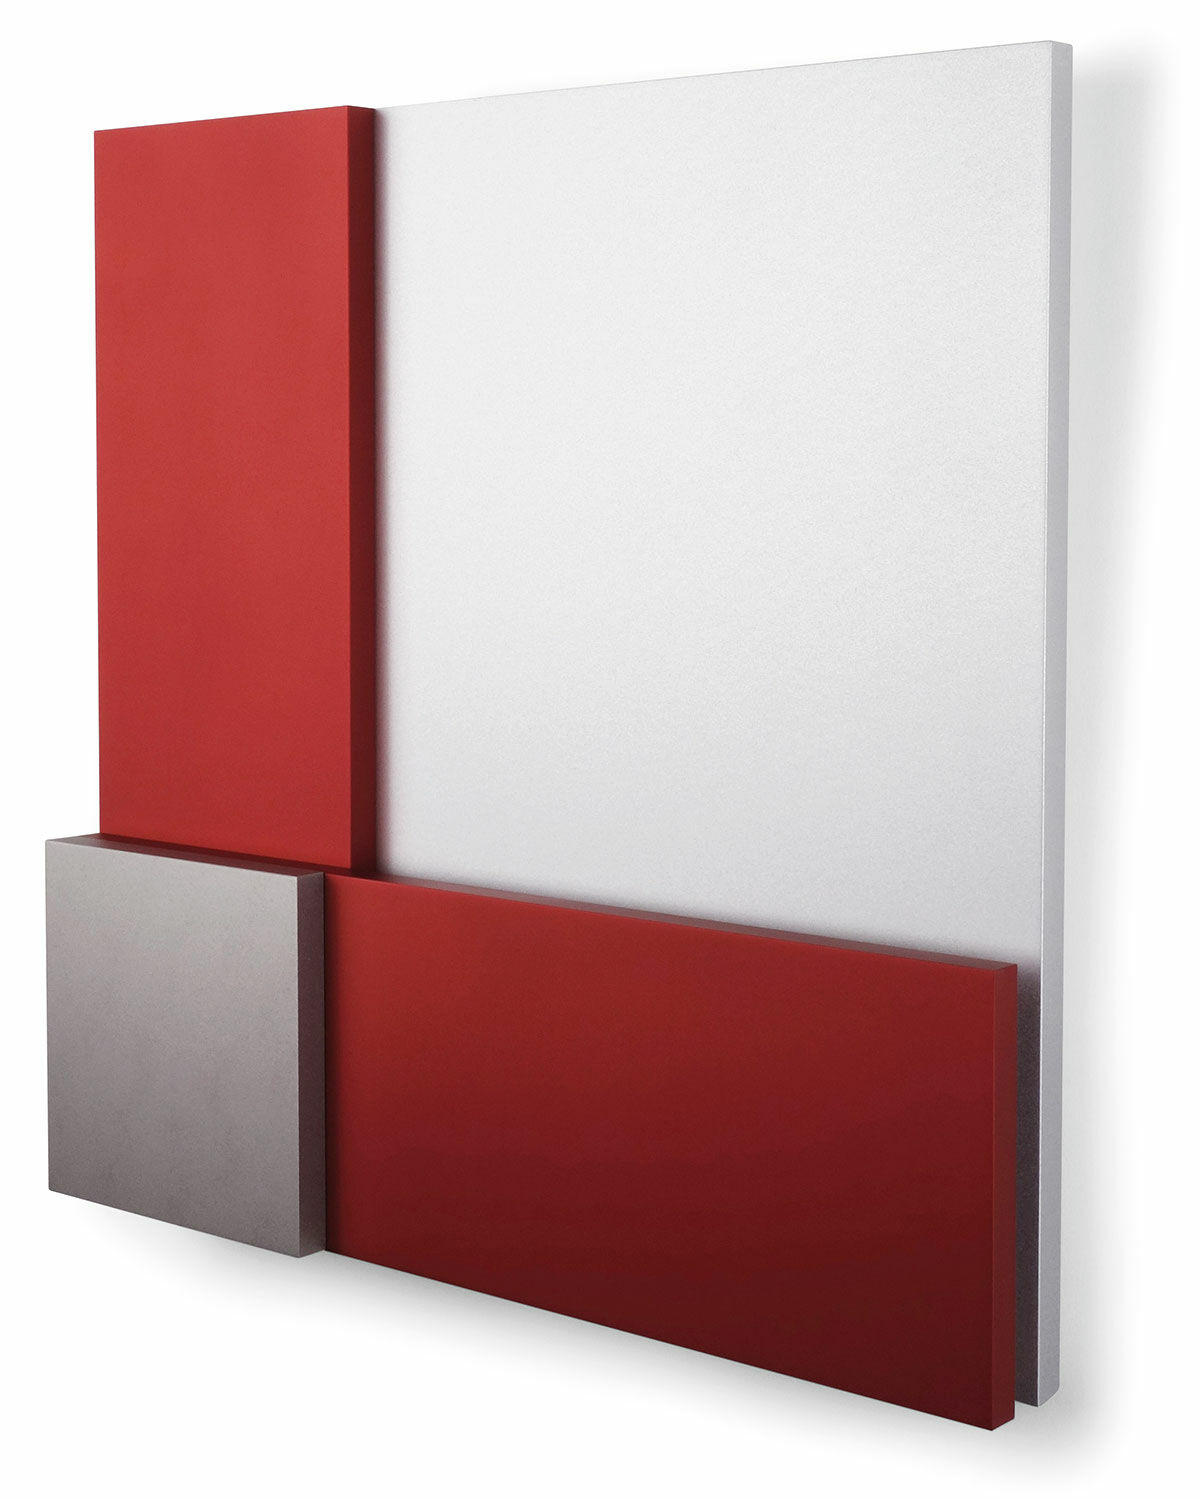 Wall sculpture "TWO RECTANGELES FORM TWO SQUARES" (2019) by Stephan Siebers